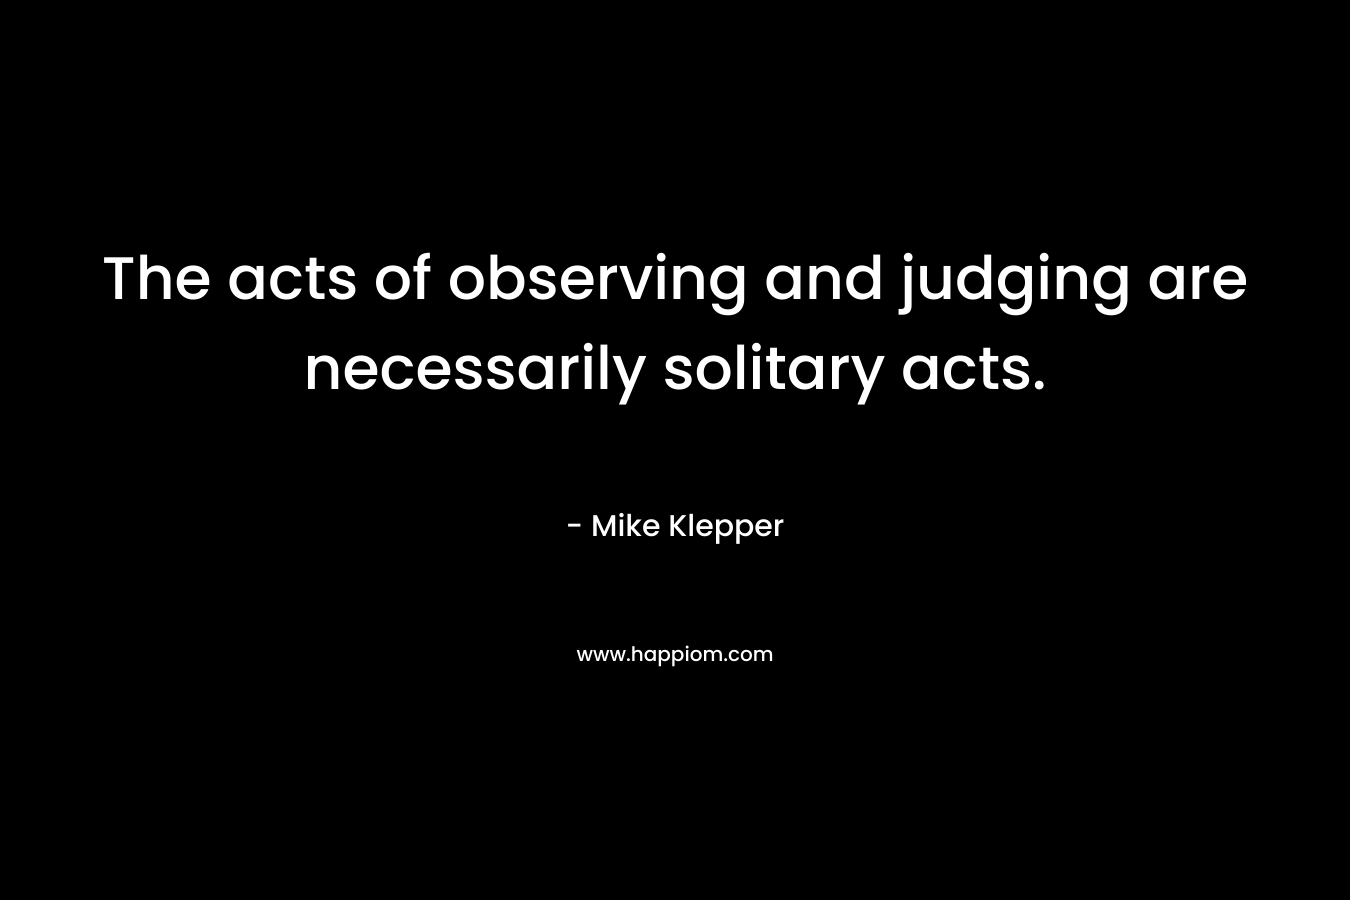 The acts of observing and judging are necessarily solitary acts.